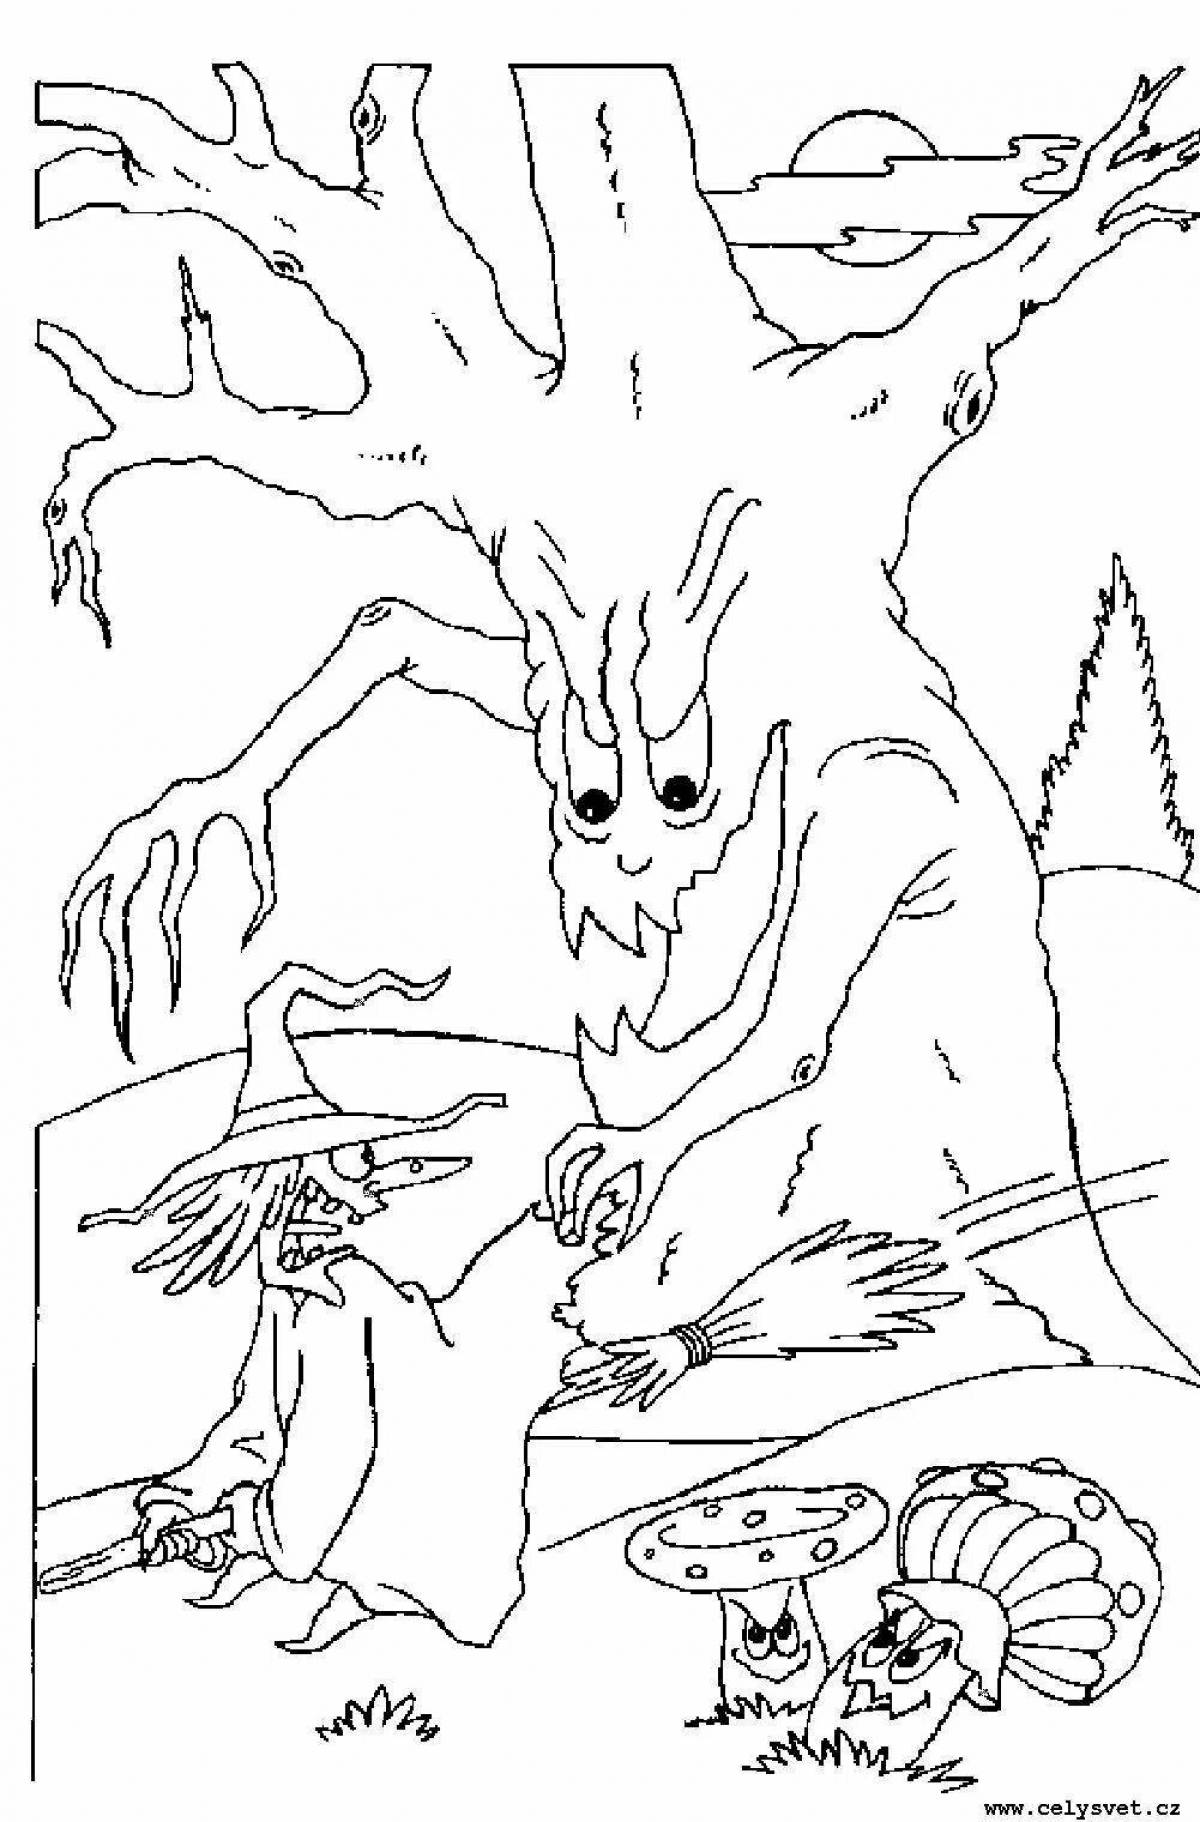 Coloring book scary repulsive child